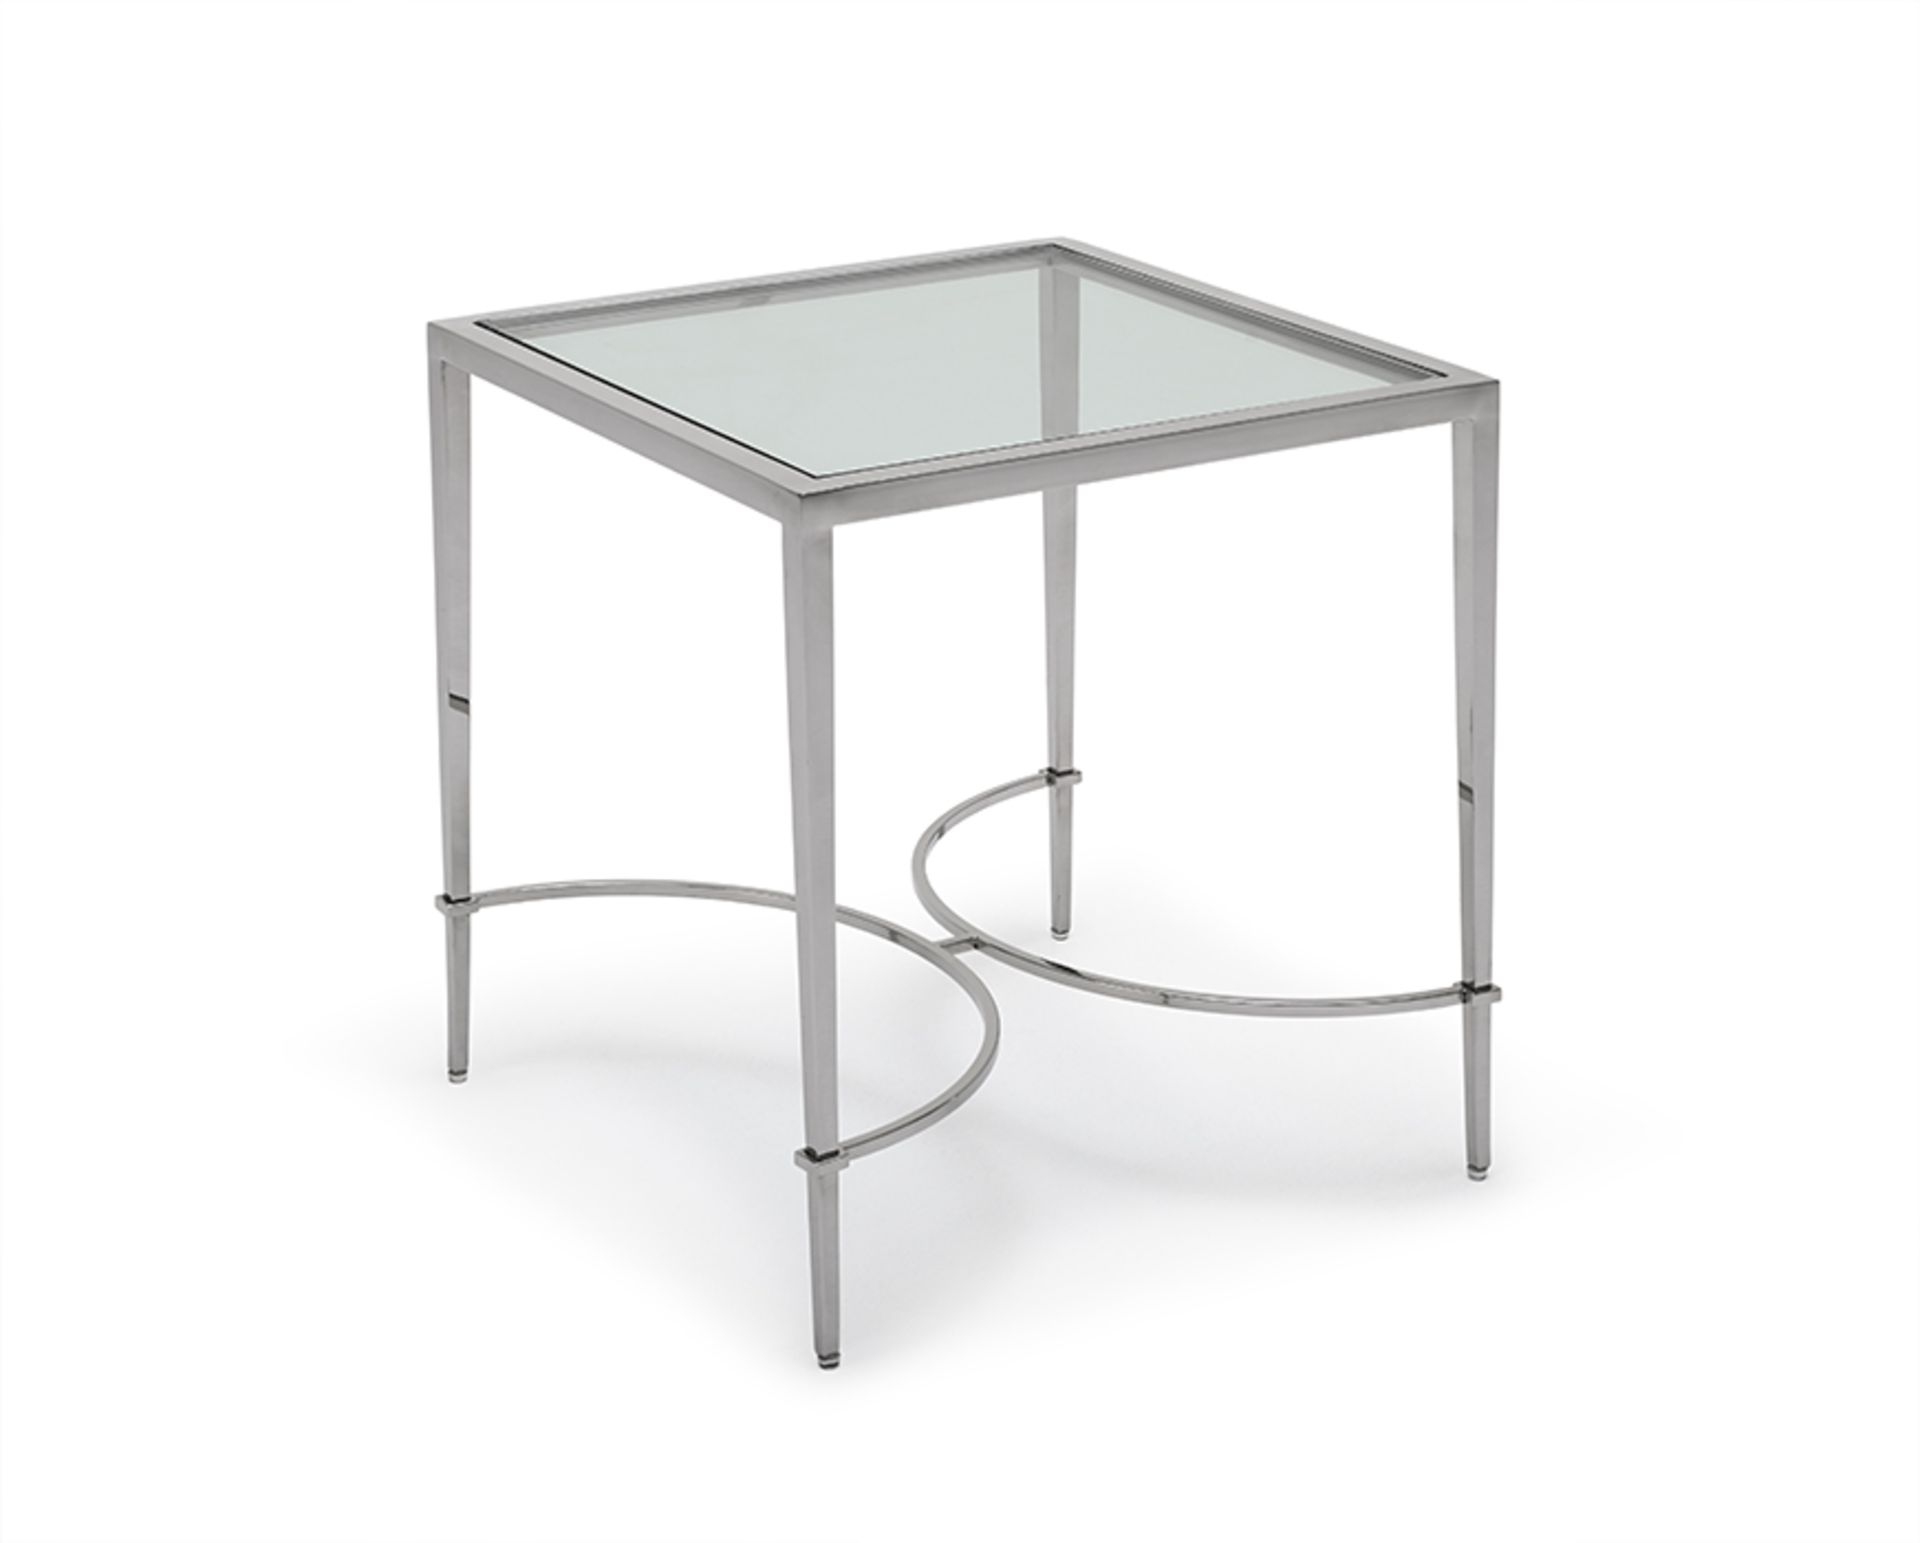 Tokyo Lamp Table by Kesterport The Tokyo lamp table with its clear glass top and a refined tapered - Bild 6 aus 6